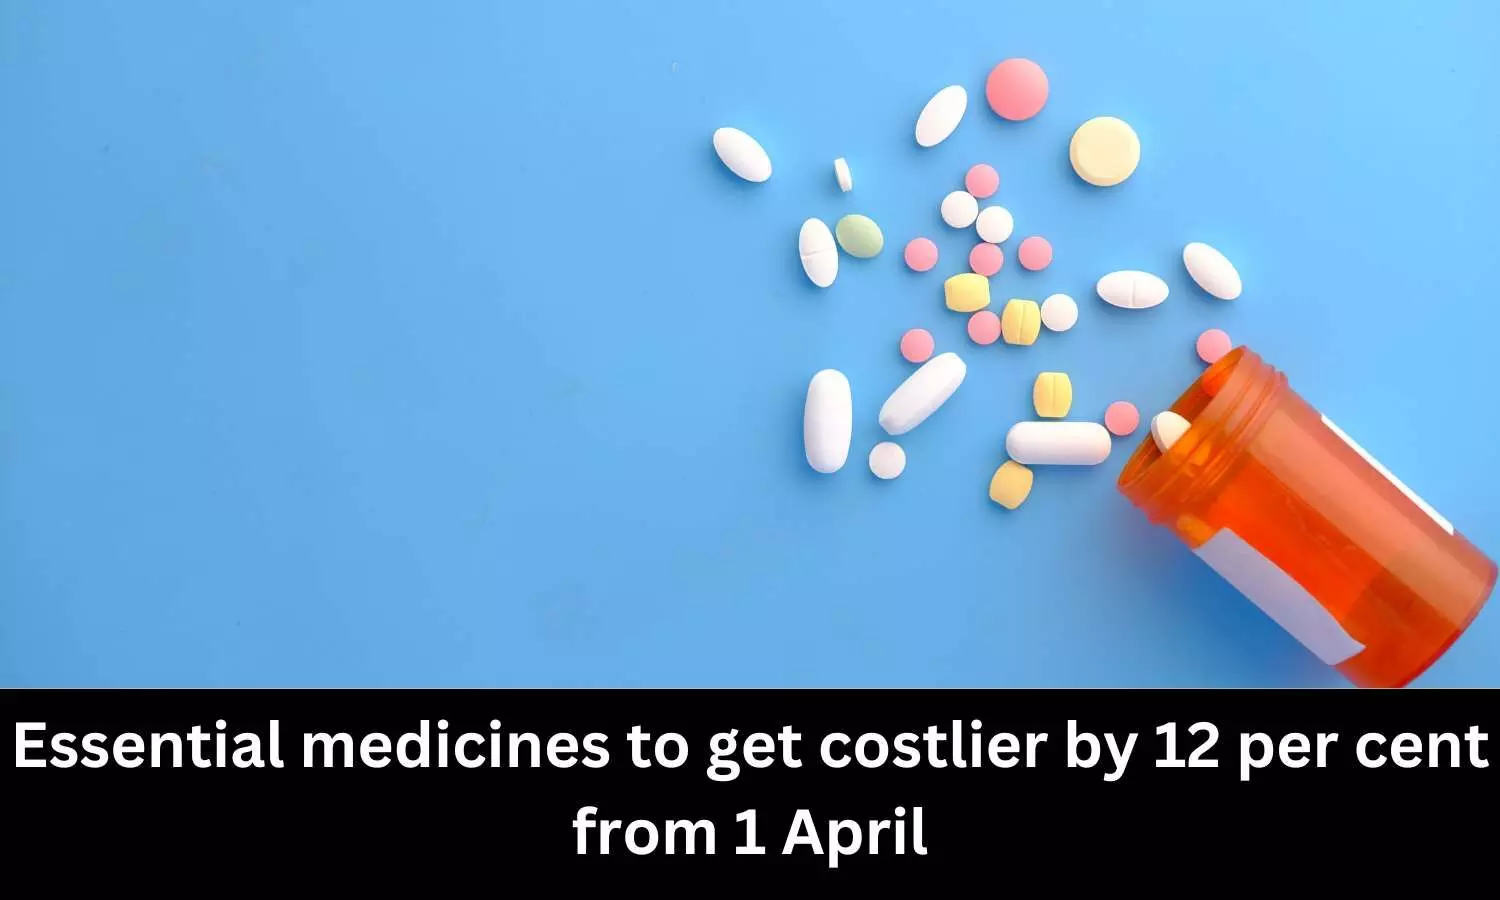 Essential medicines to get costlier by over 12 per cent from 1 April